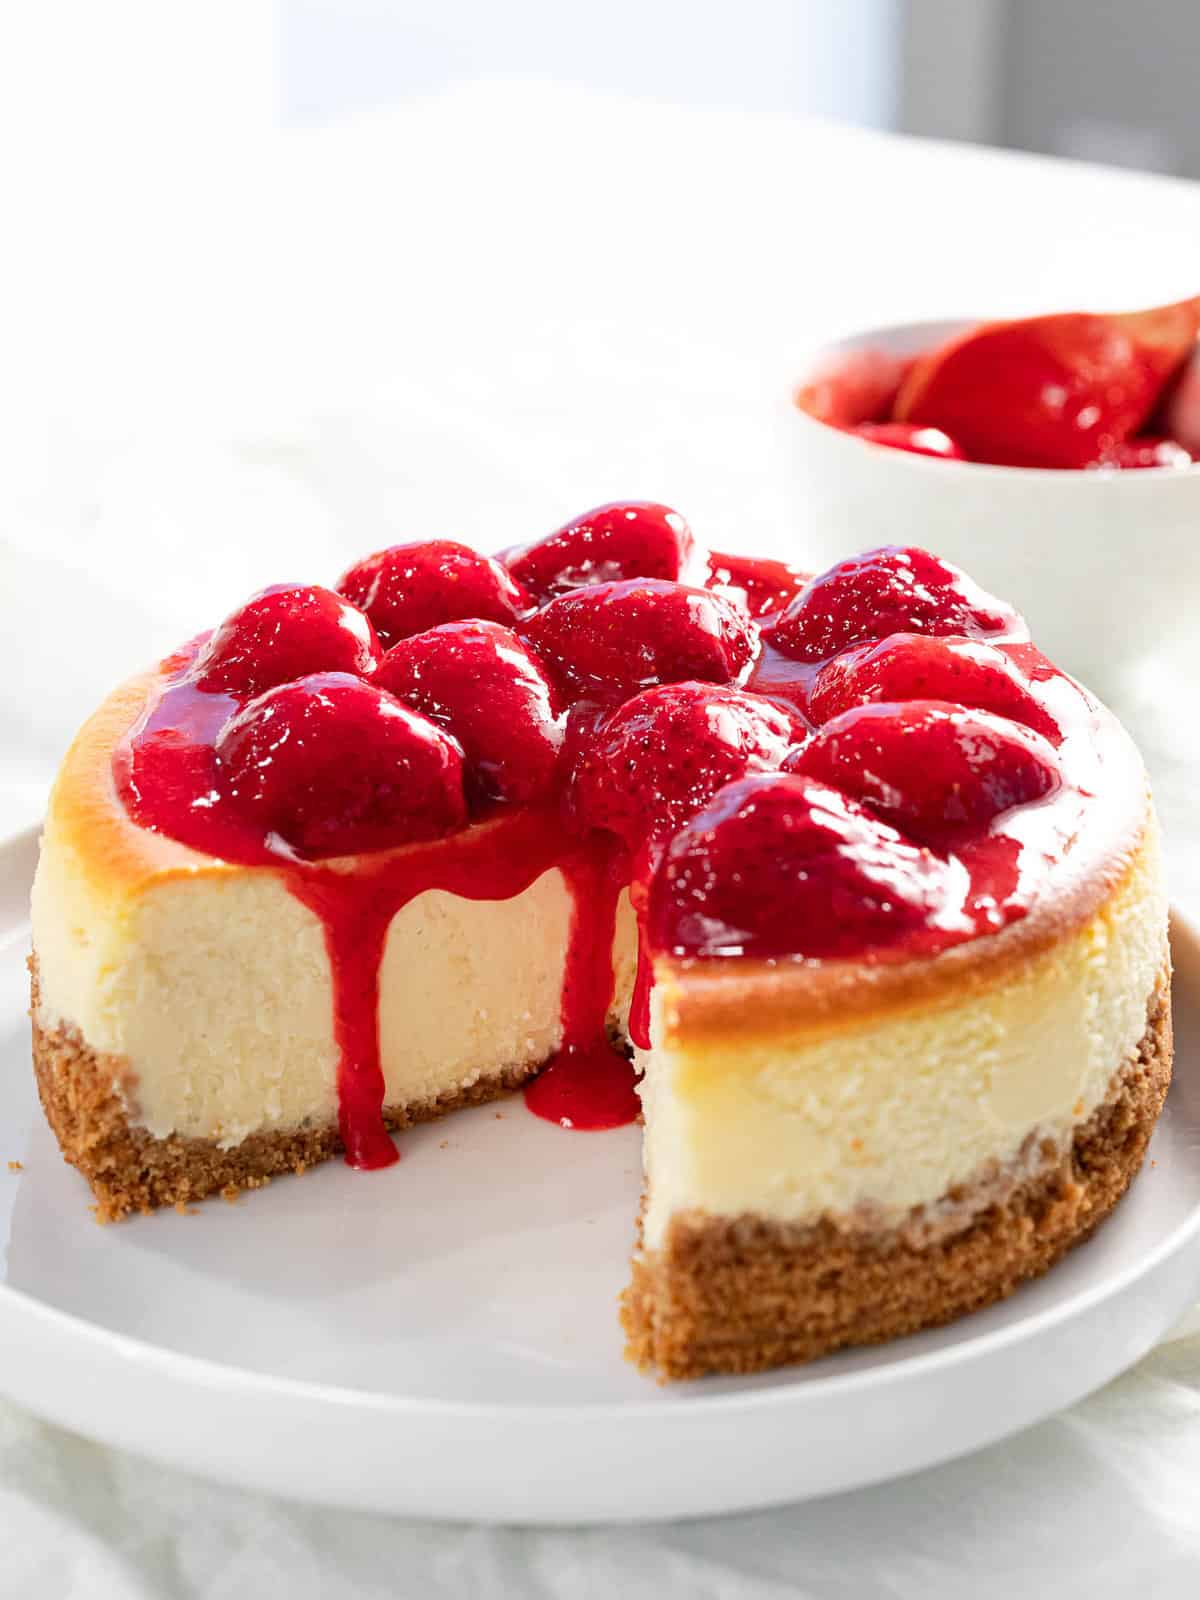 Baked strawberry cheesecake with strawberry topping.